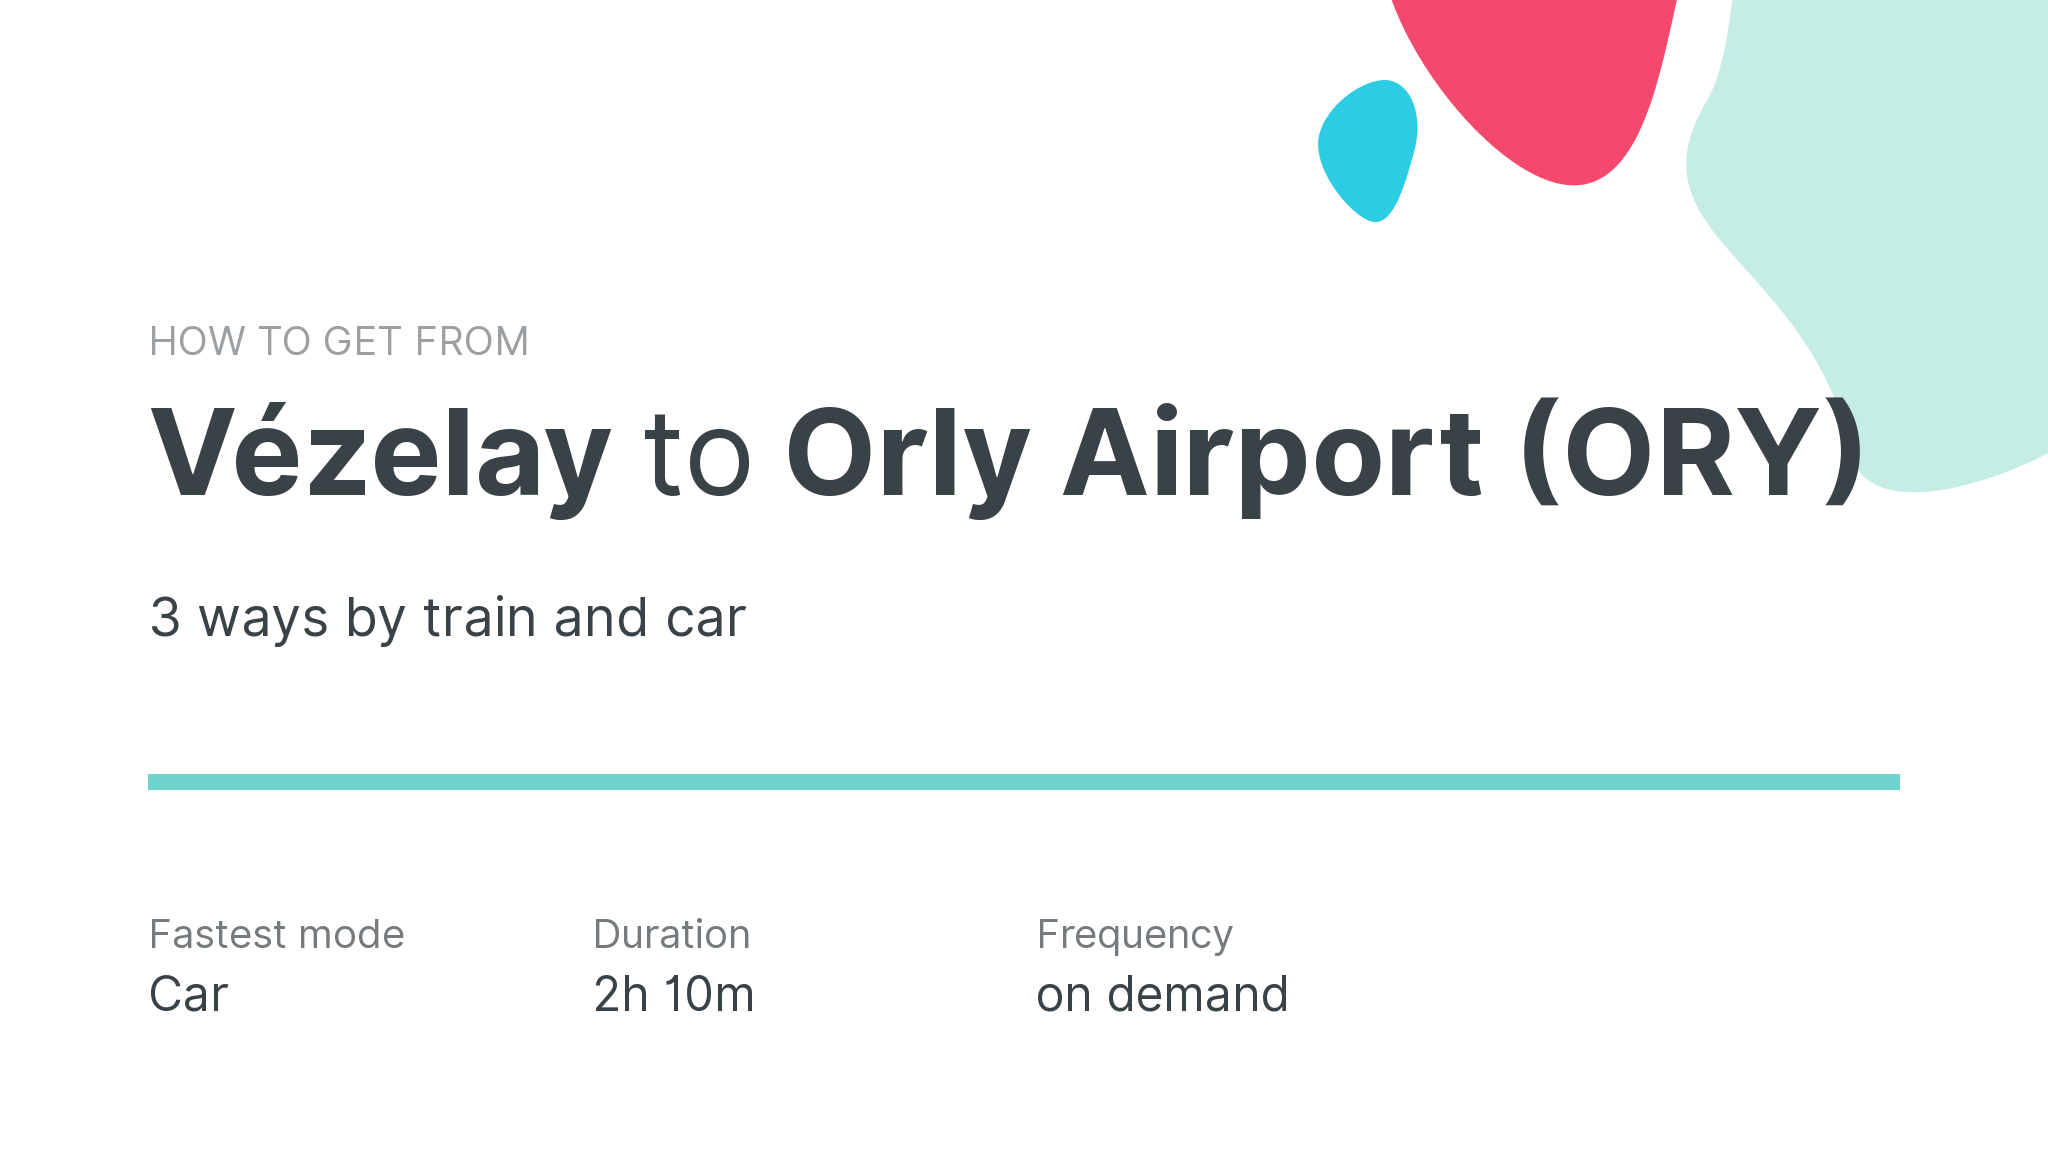 How do I get from Vézelay to Orly Airport (ORY)